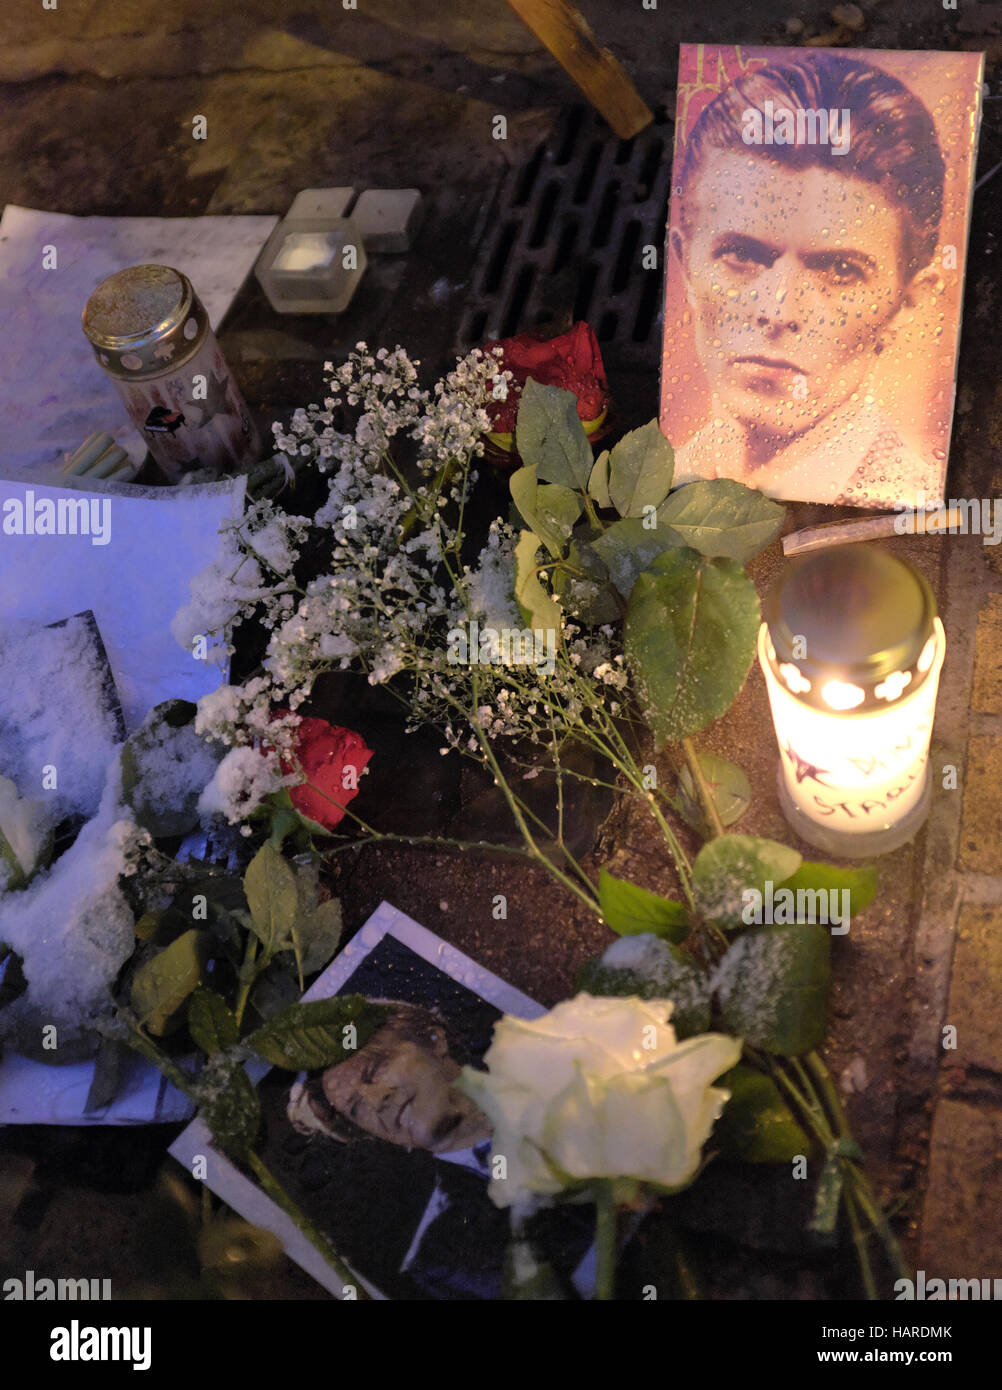 Memorial in front of David Bowie's previous Berlin Haupstrasse  apartment complex after his death in January, 2016. Stock Photo